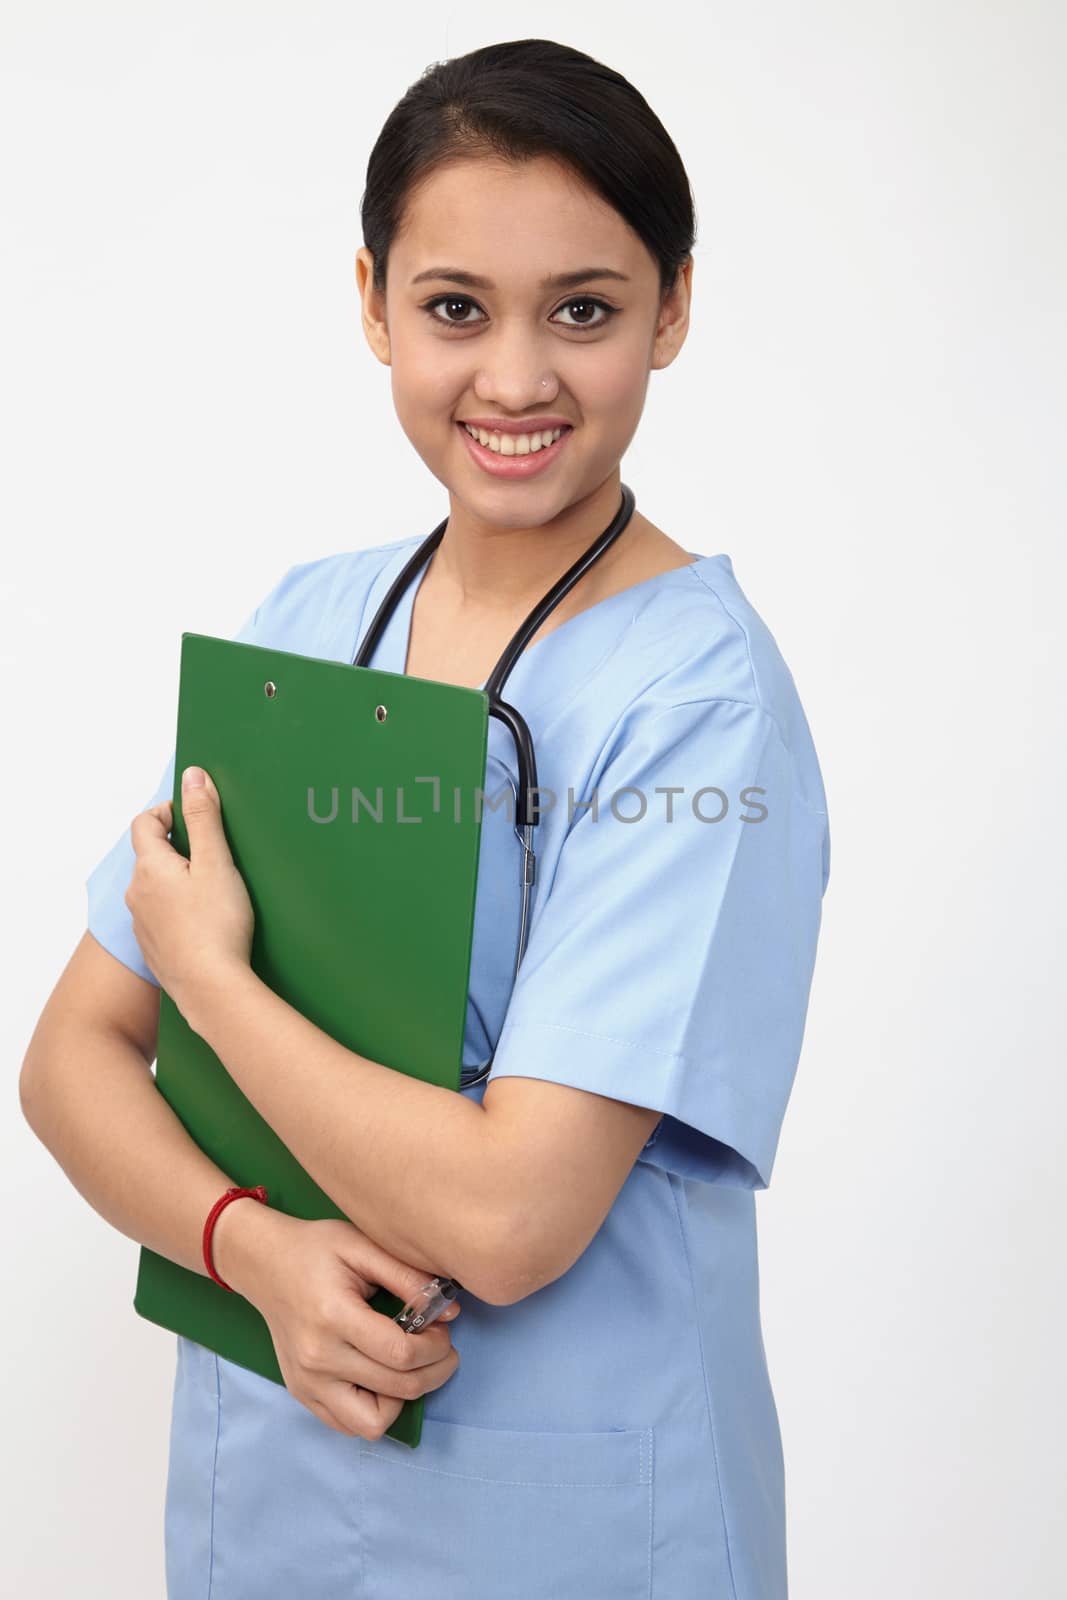 nurse doctor woman smile with stethoscope hold clipboard, wear blue surgery medical suit. Isolated over white background

